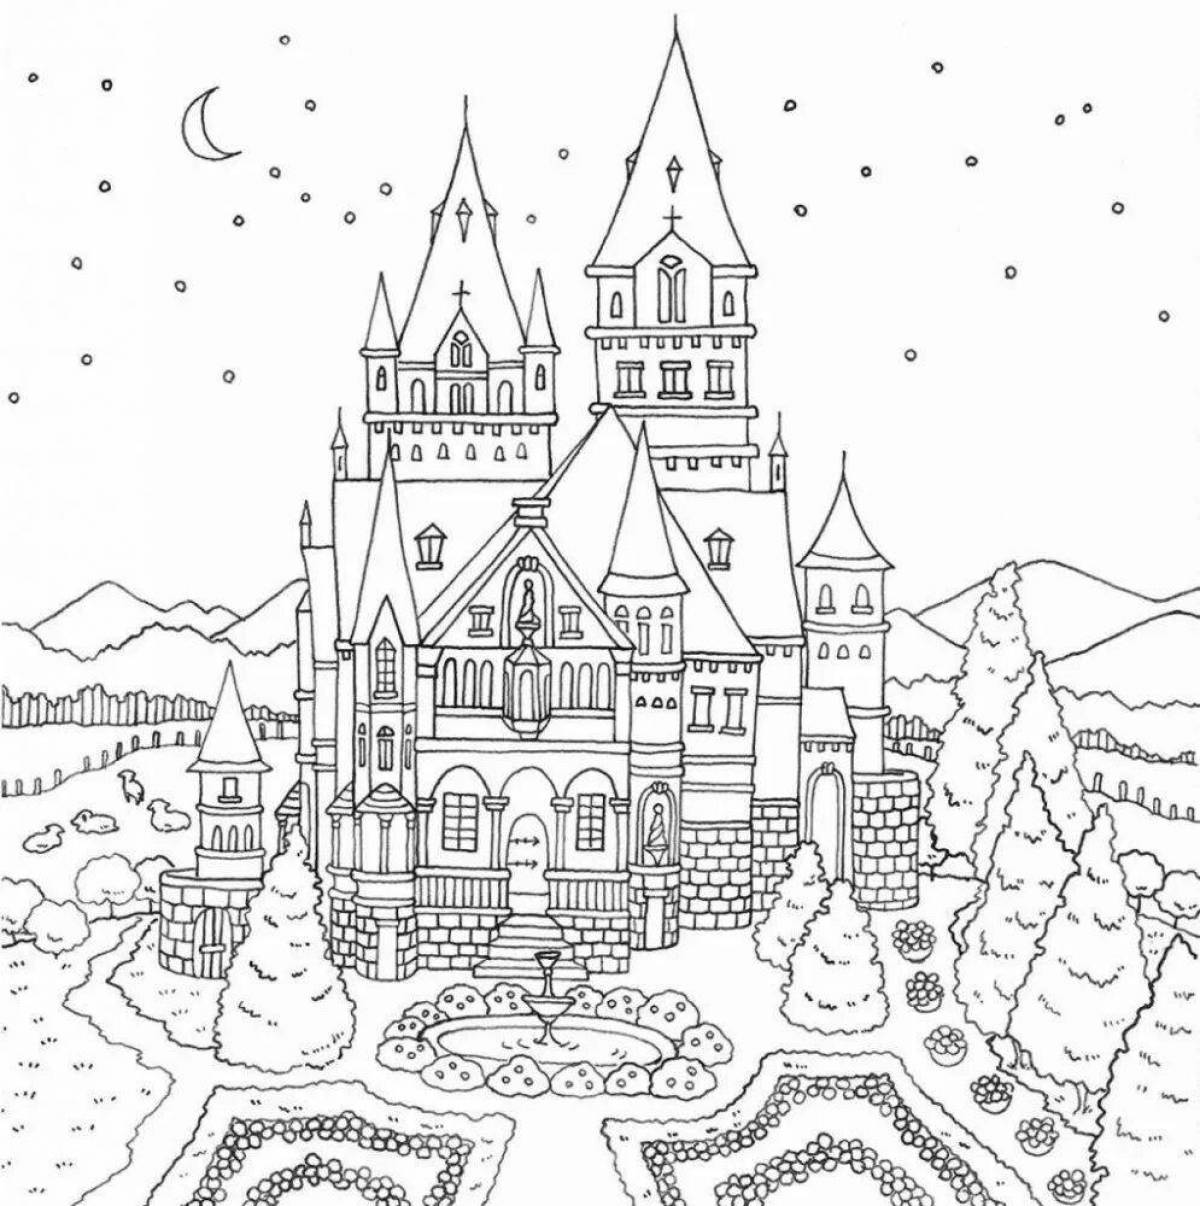 Coloring book of the luxurious palace of the snow queen